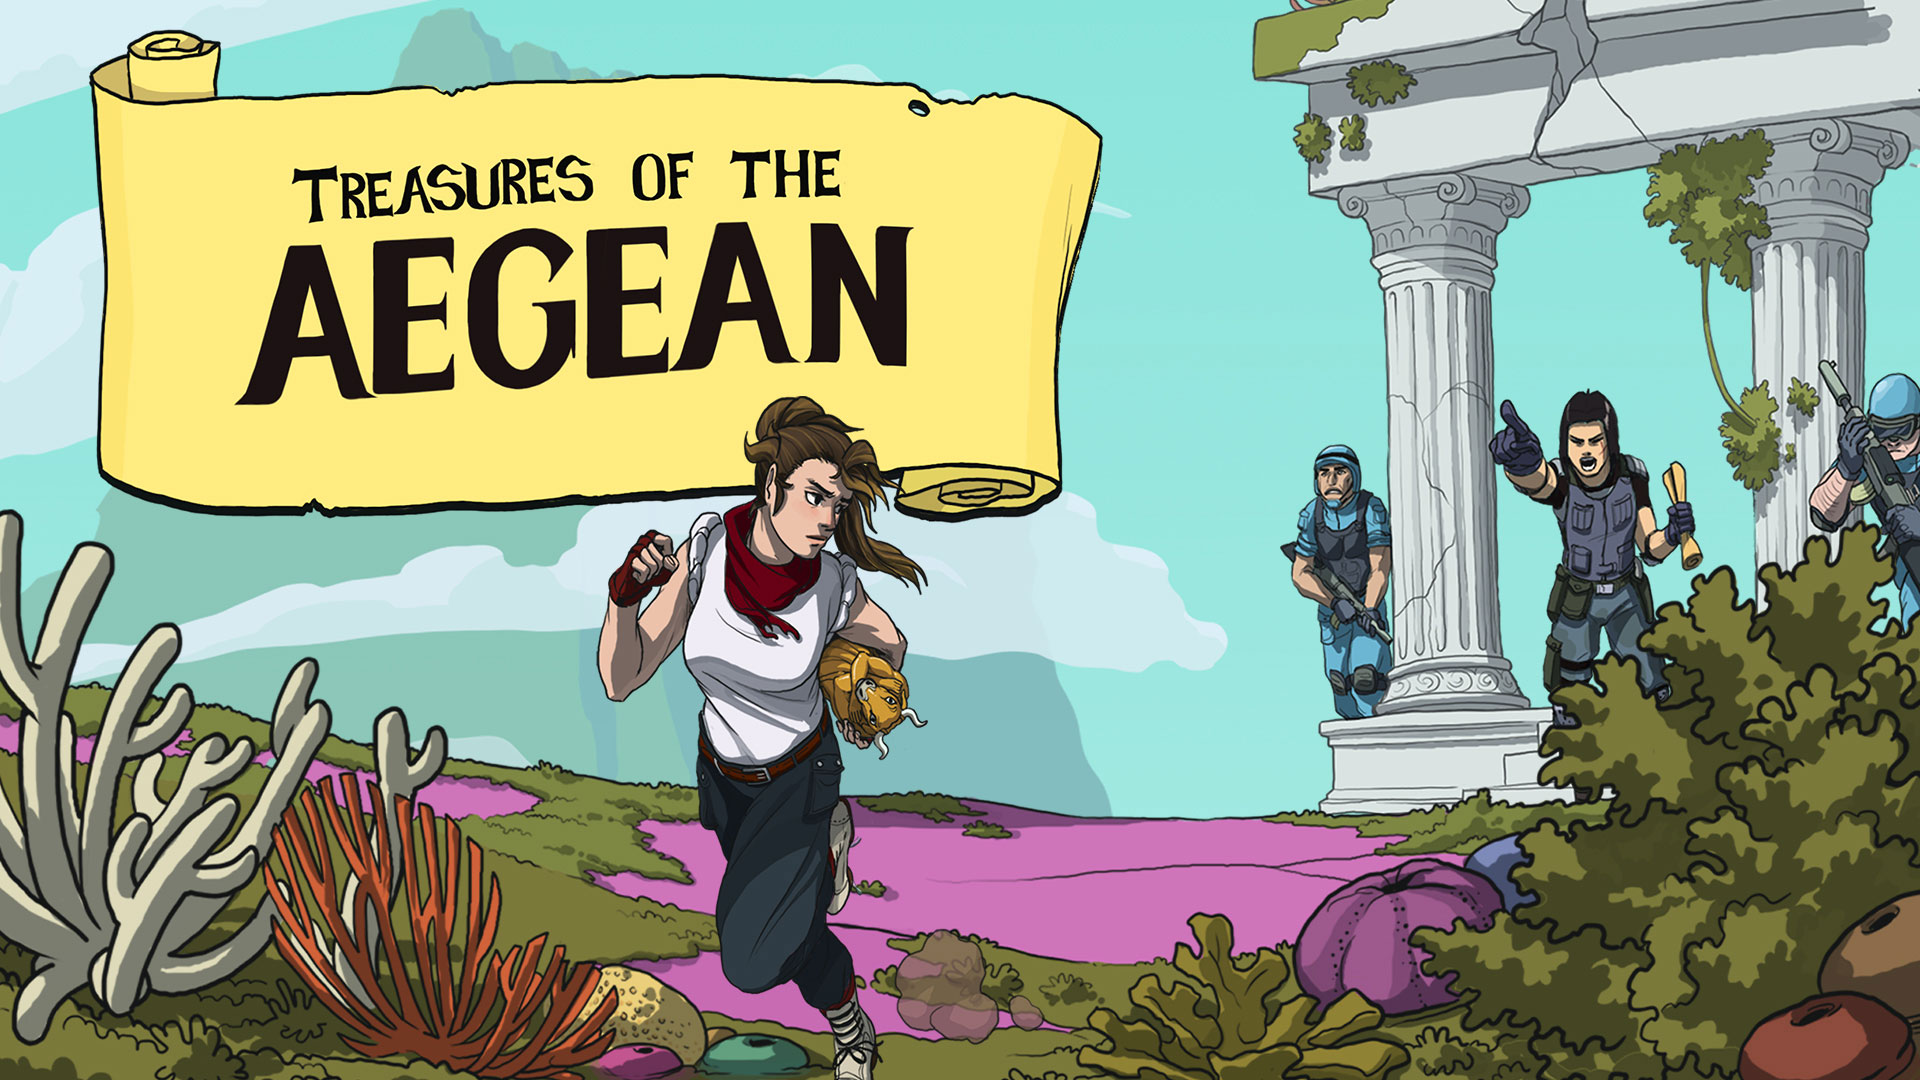 Video For Treasures of the Aegean, a Time Loop Action Adventure, Available Now